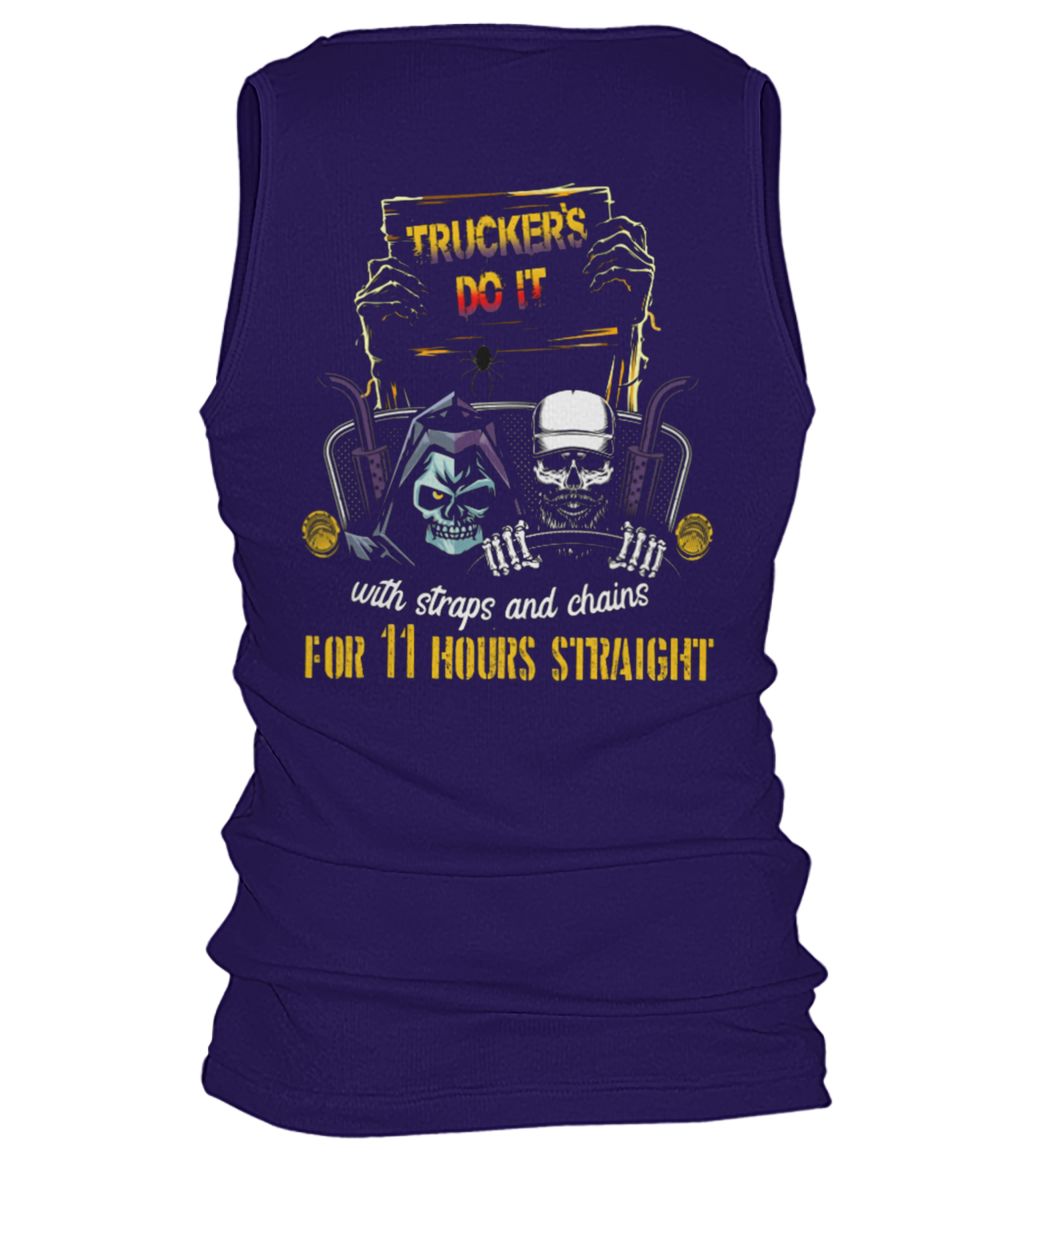 Trucker's do it with straps and chains for 11 hours straight skeleton men's tank top